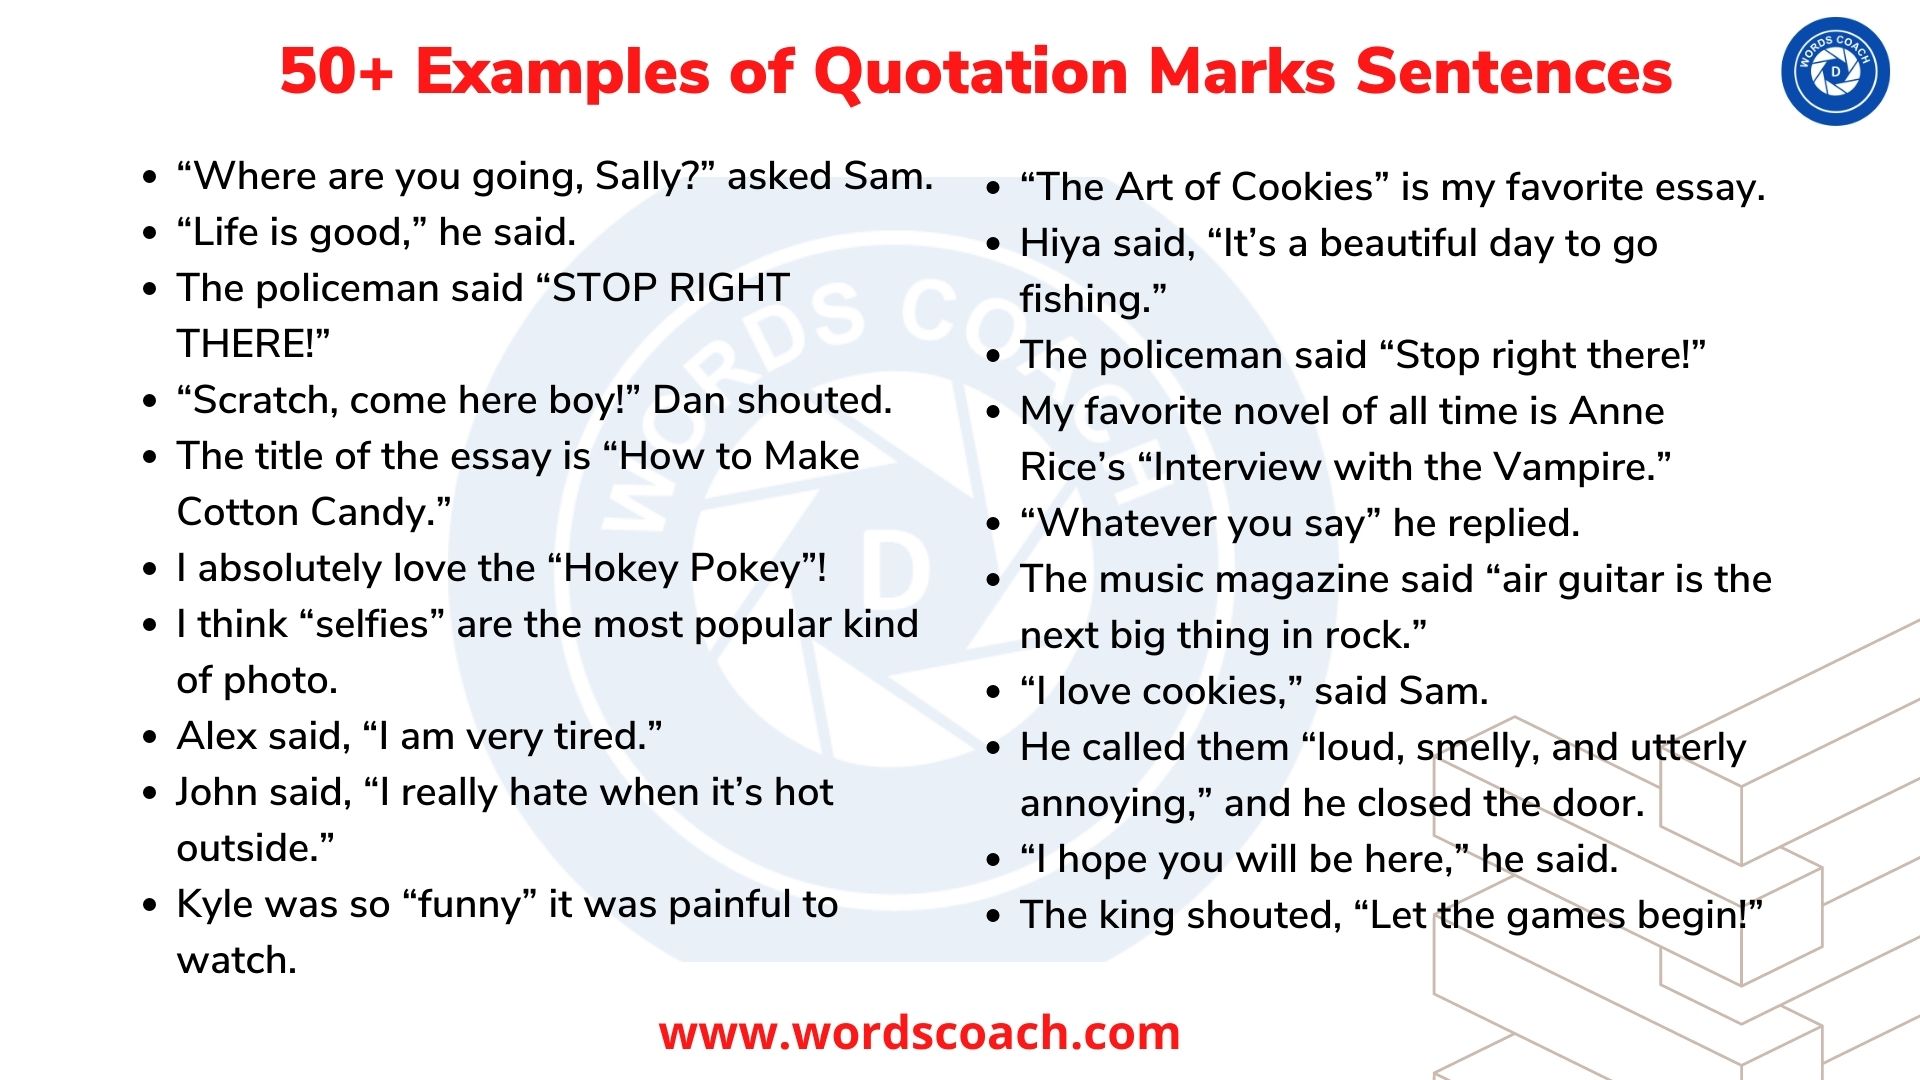 50+ Examples of Quotation Marks Sentences - Word Coach